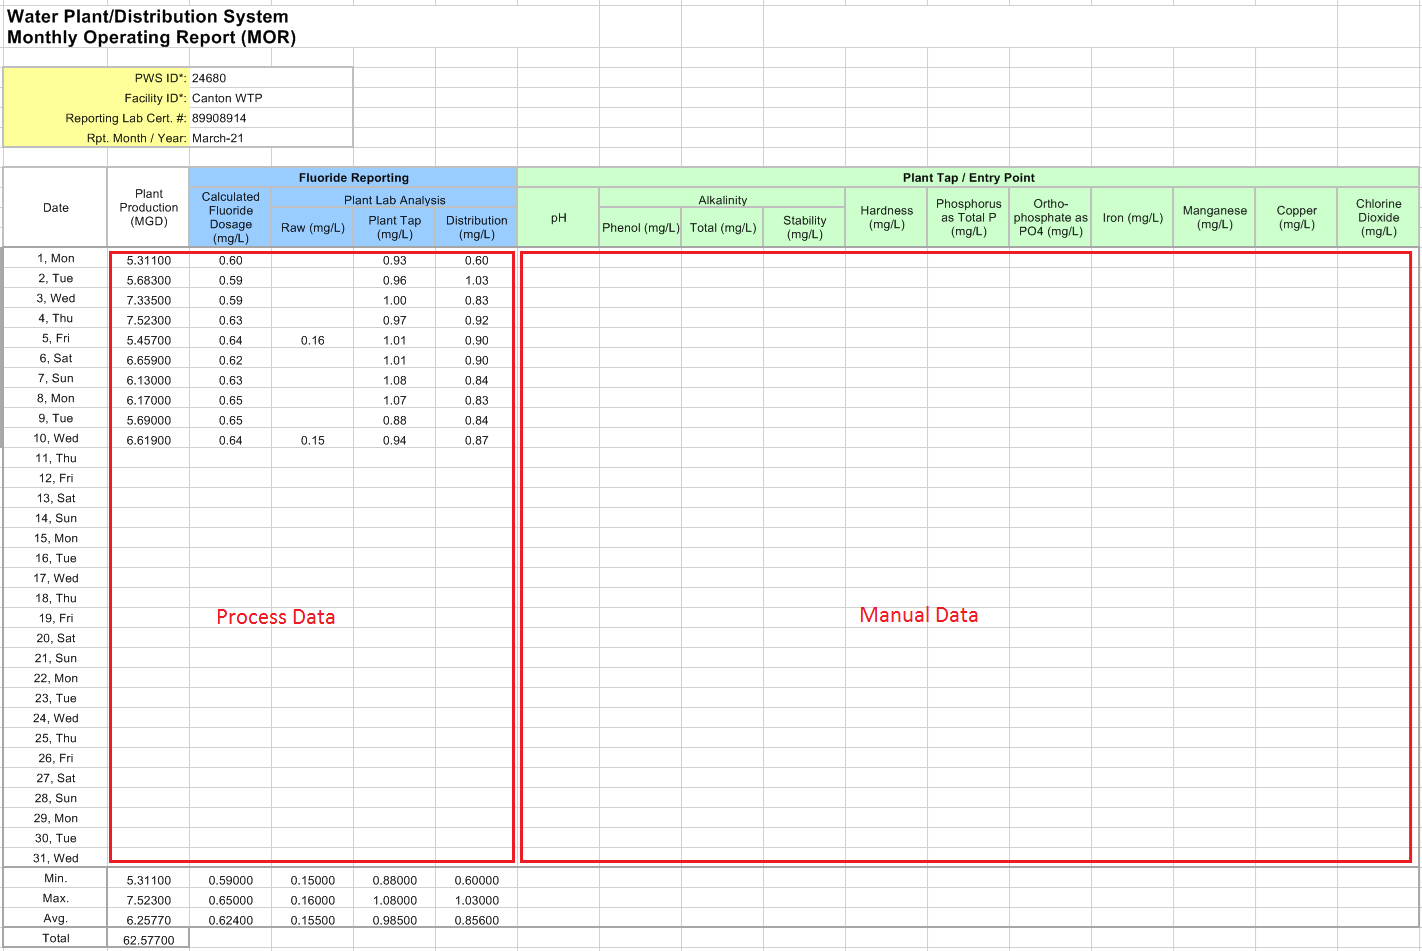 A Monthly Operating Report using process data to partially fill out the form, which can be edited if needed.